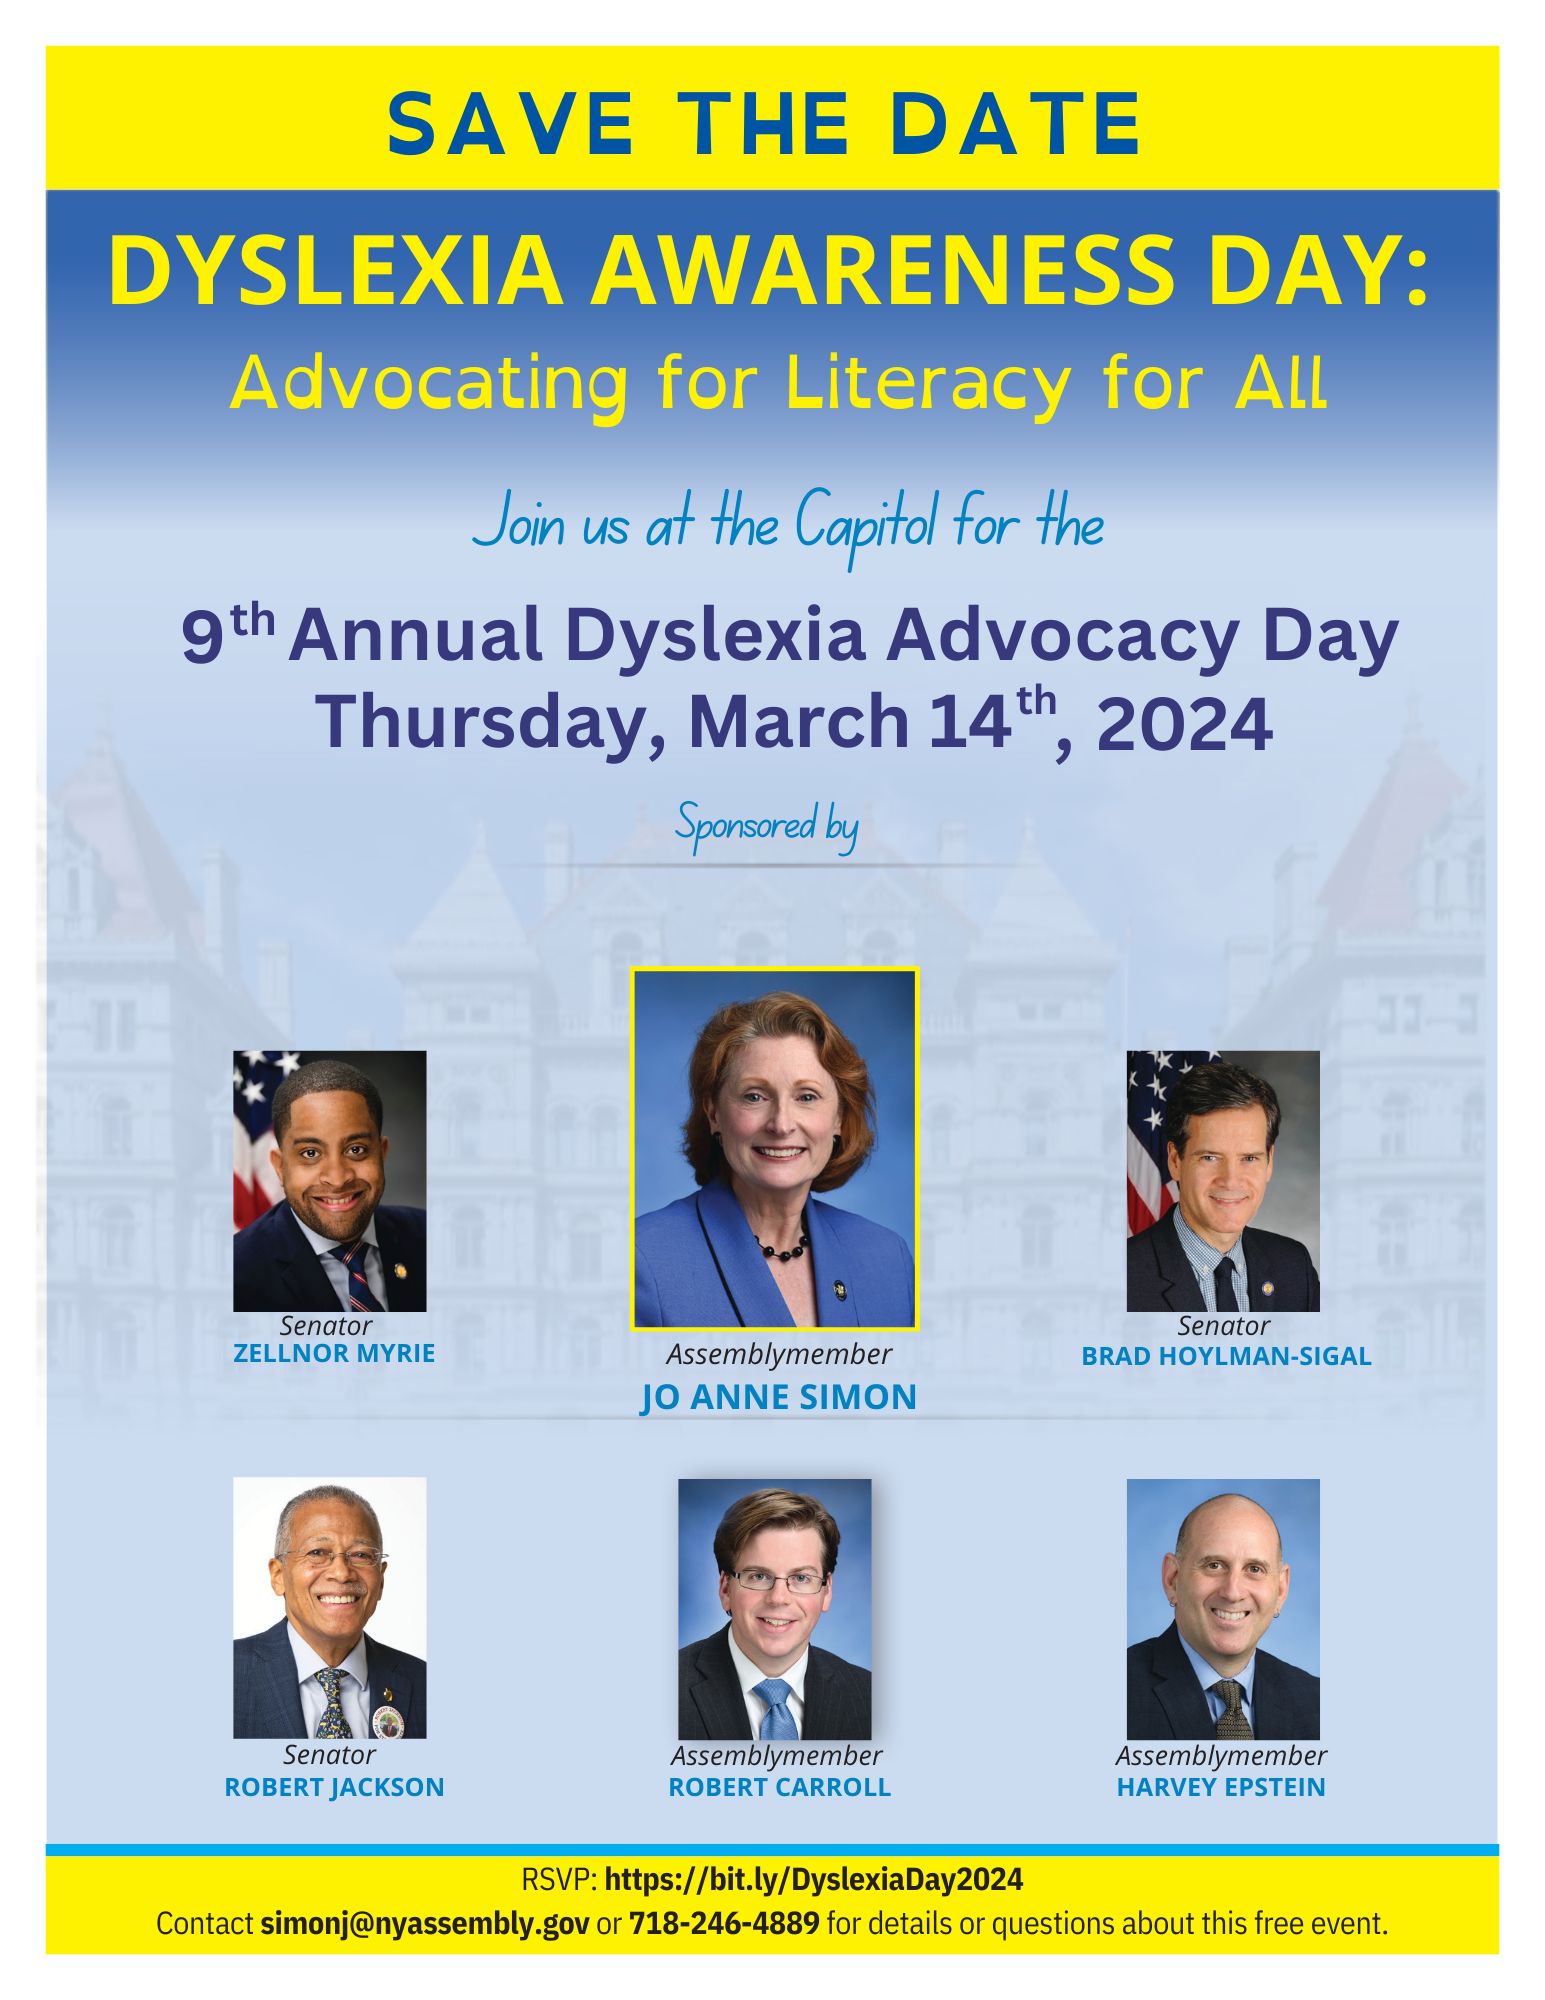 Save the Date Dyslexia Awareness Day flyer